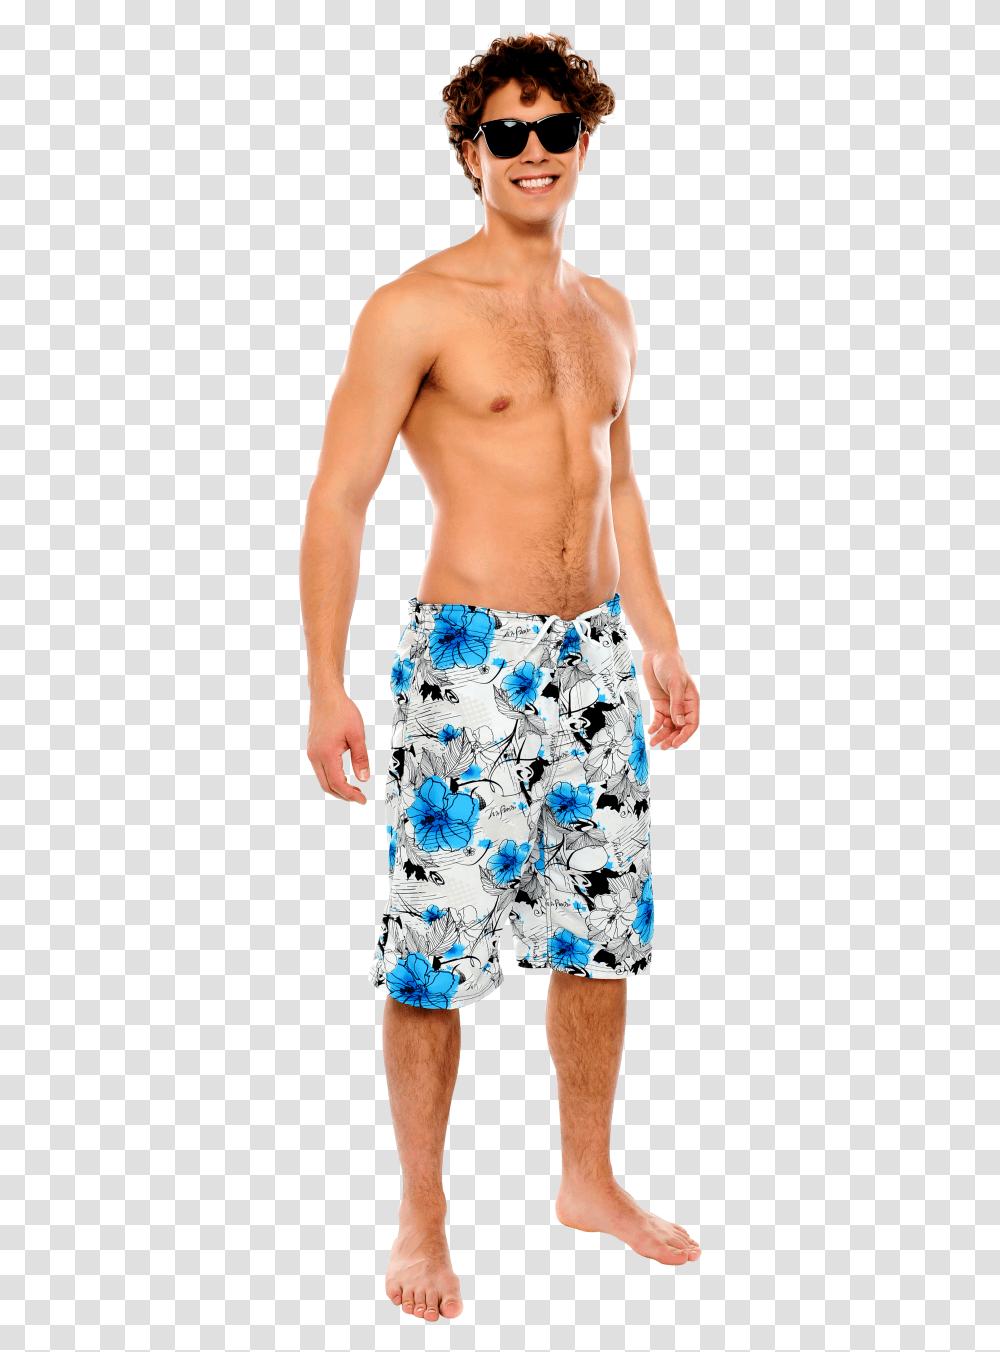 Cool Guy Image Cool Guy, Apparel, Shorts, Sunglasses Transparent Png